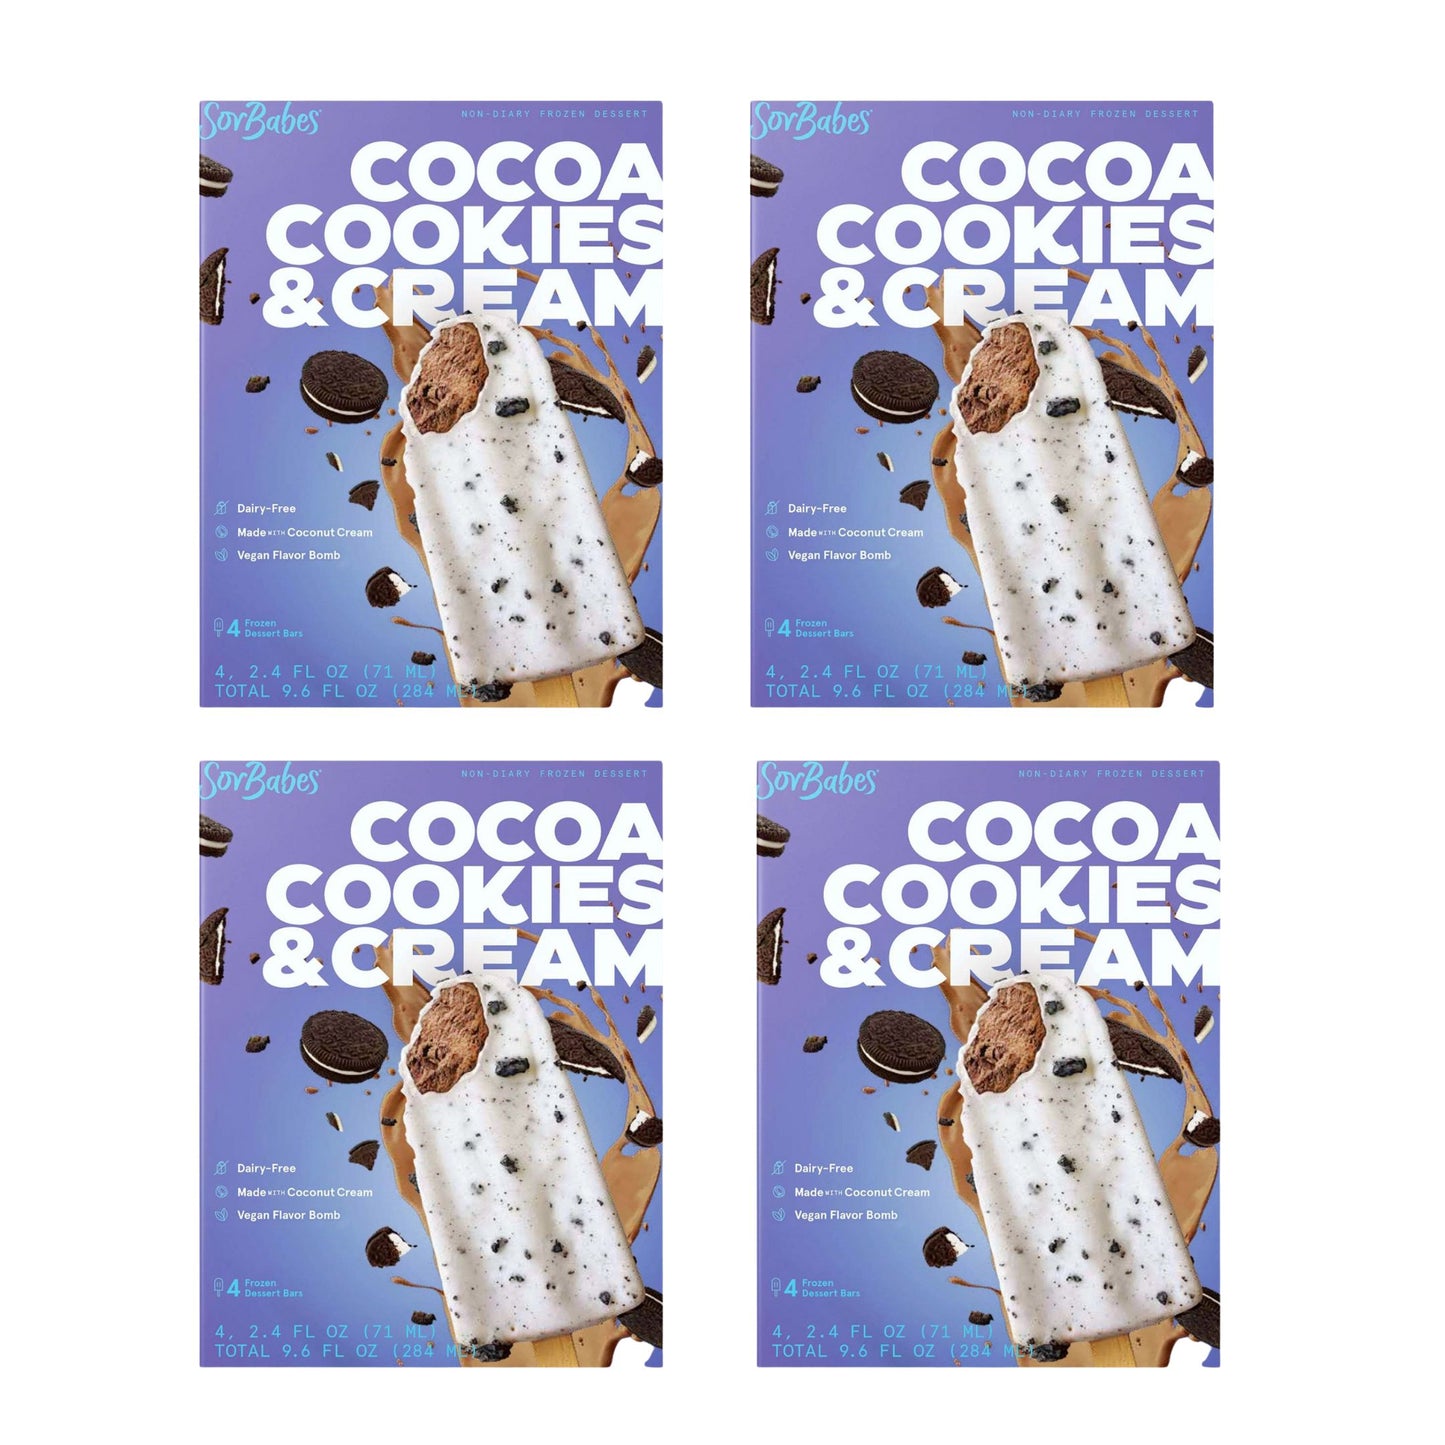 SORBABES COCOA COOKIES & CREAM PACK (4 BOXES)